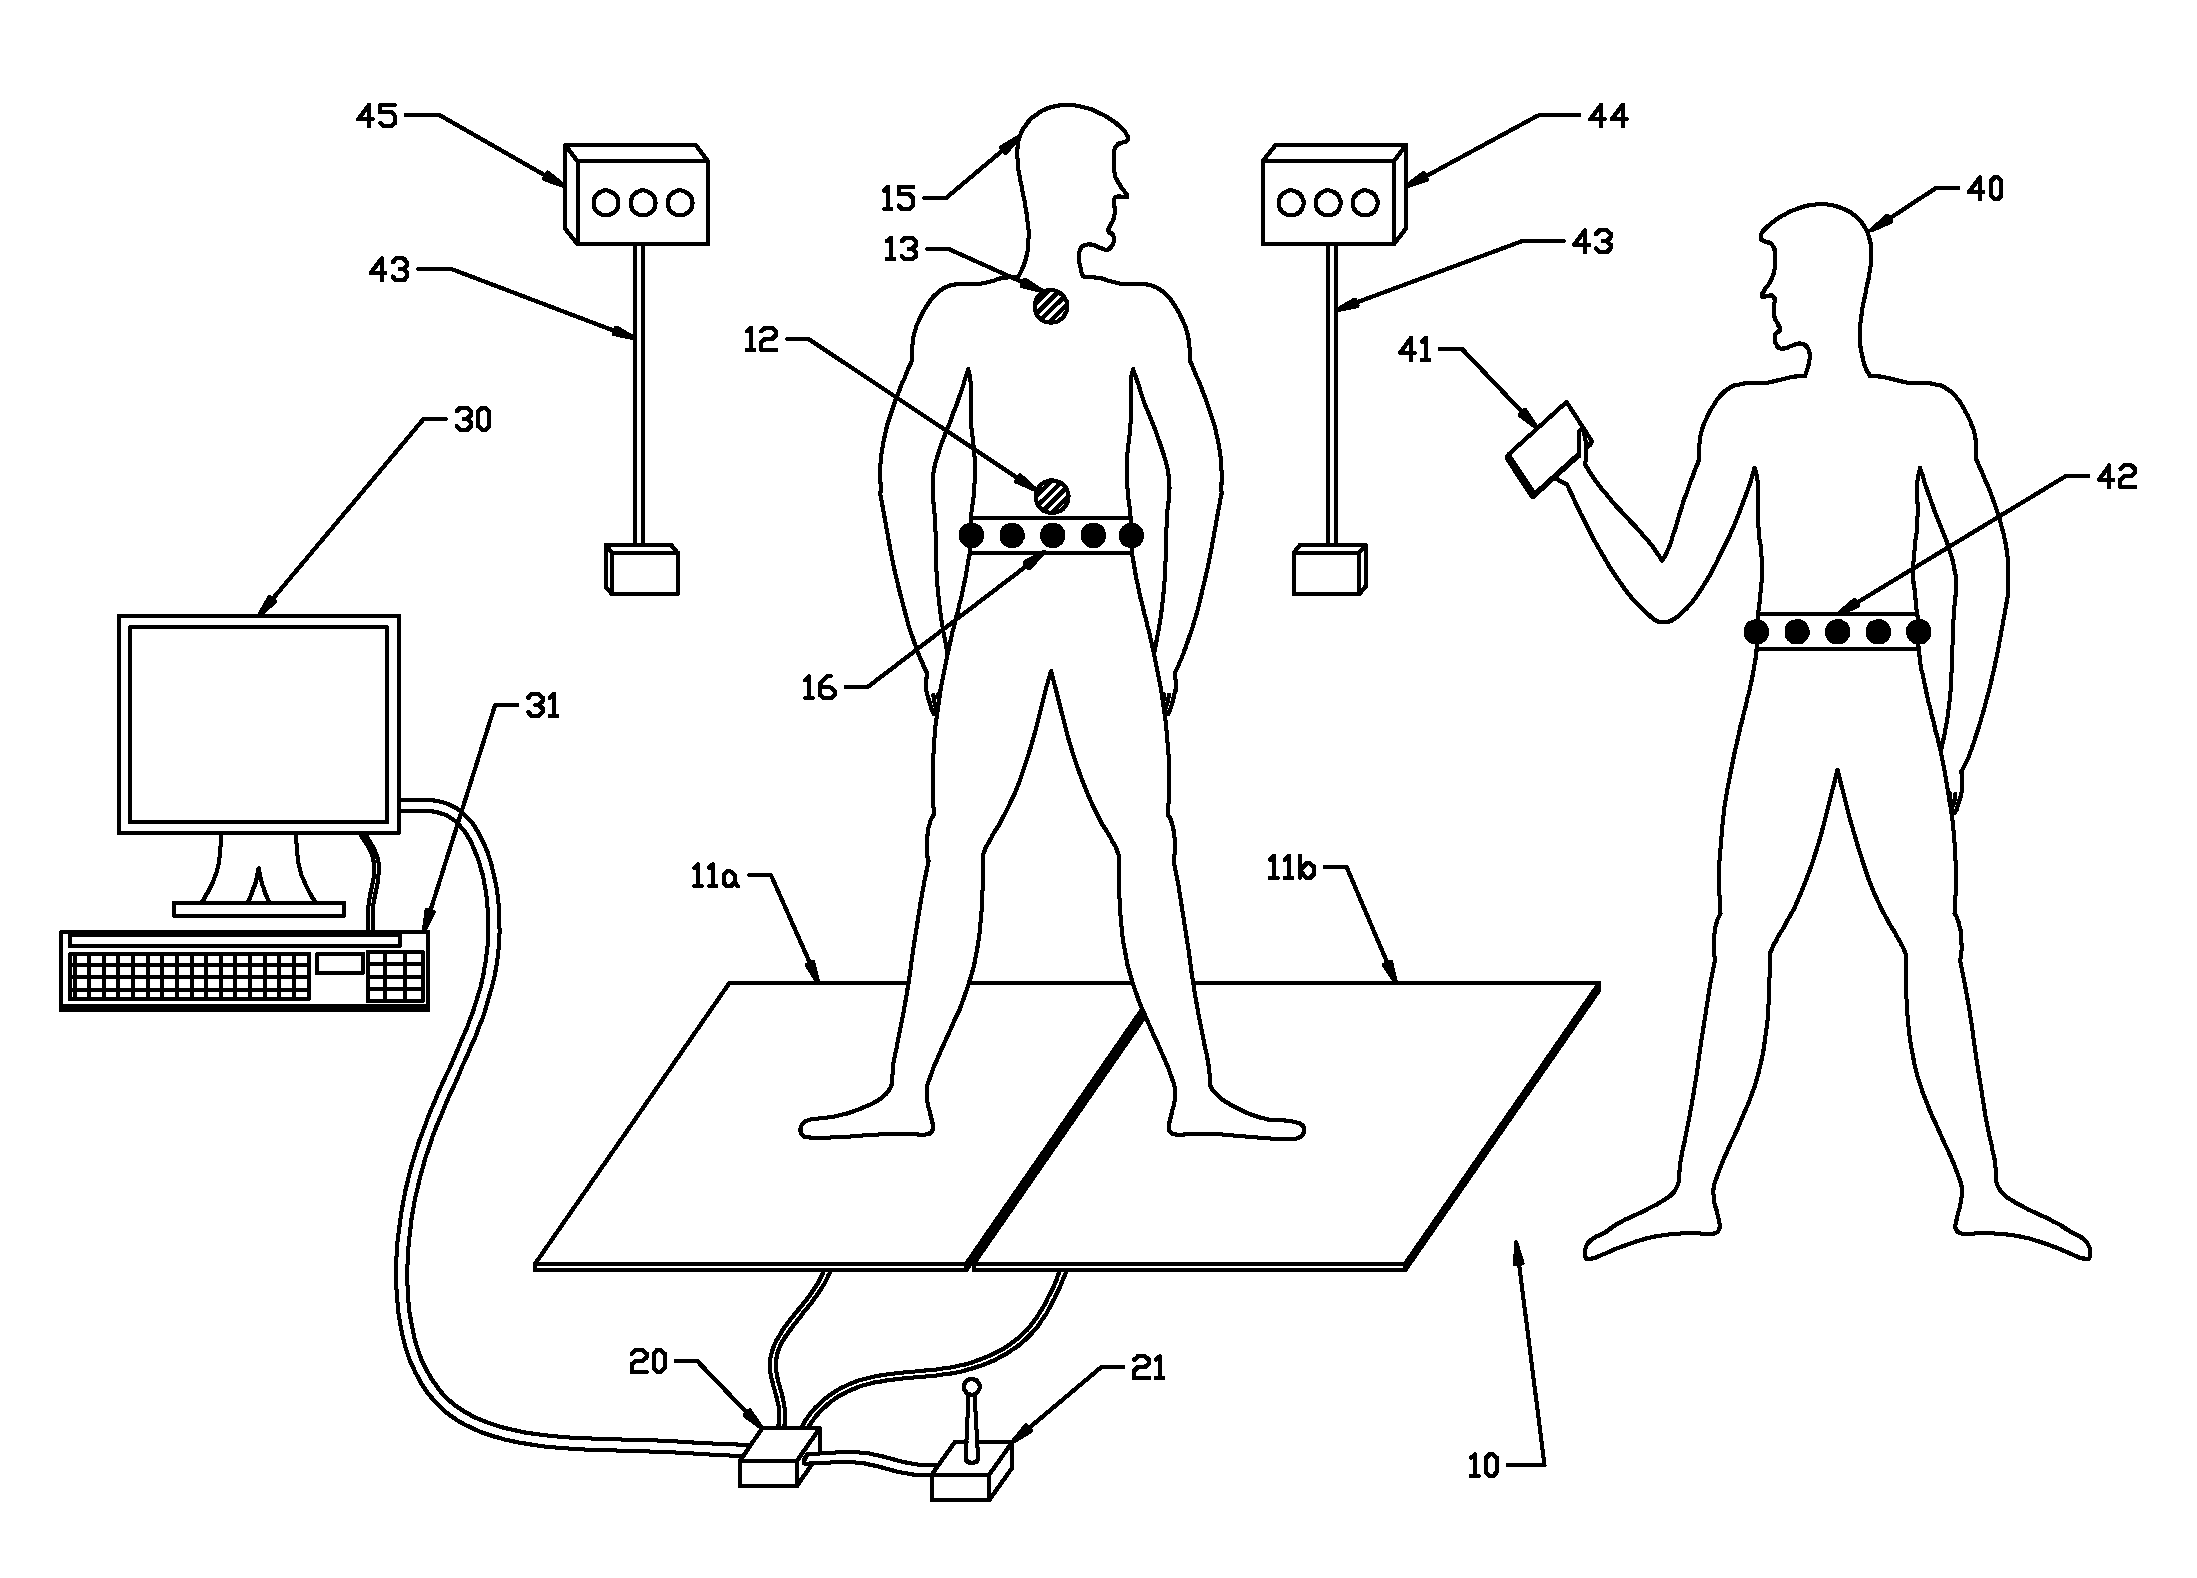 Enhanced system and method for assessment of disequilibrium, balance and motion disorders